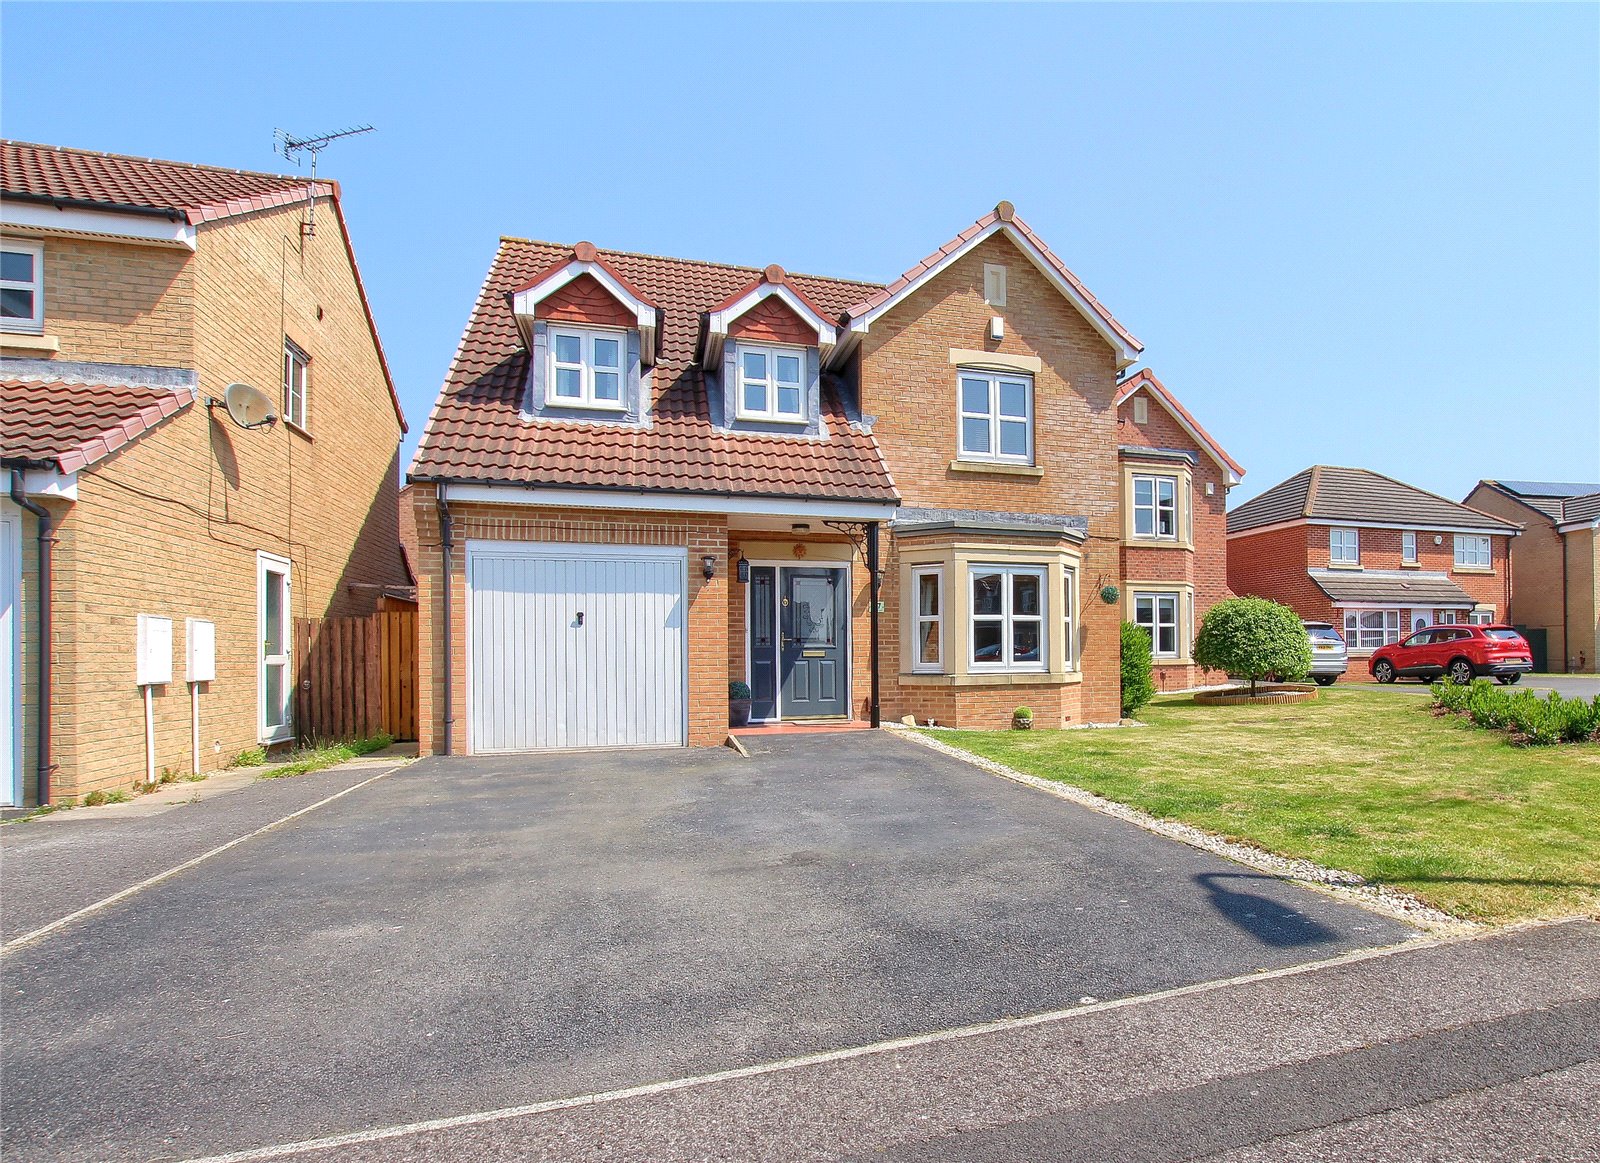 4 bed house for sale in Goldsmith Close, Wolviston Grange - Property Image 1